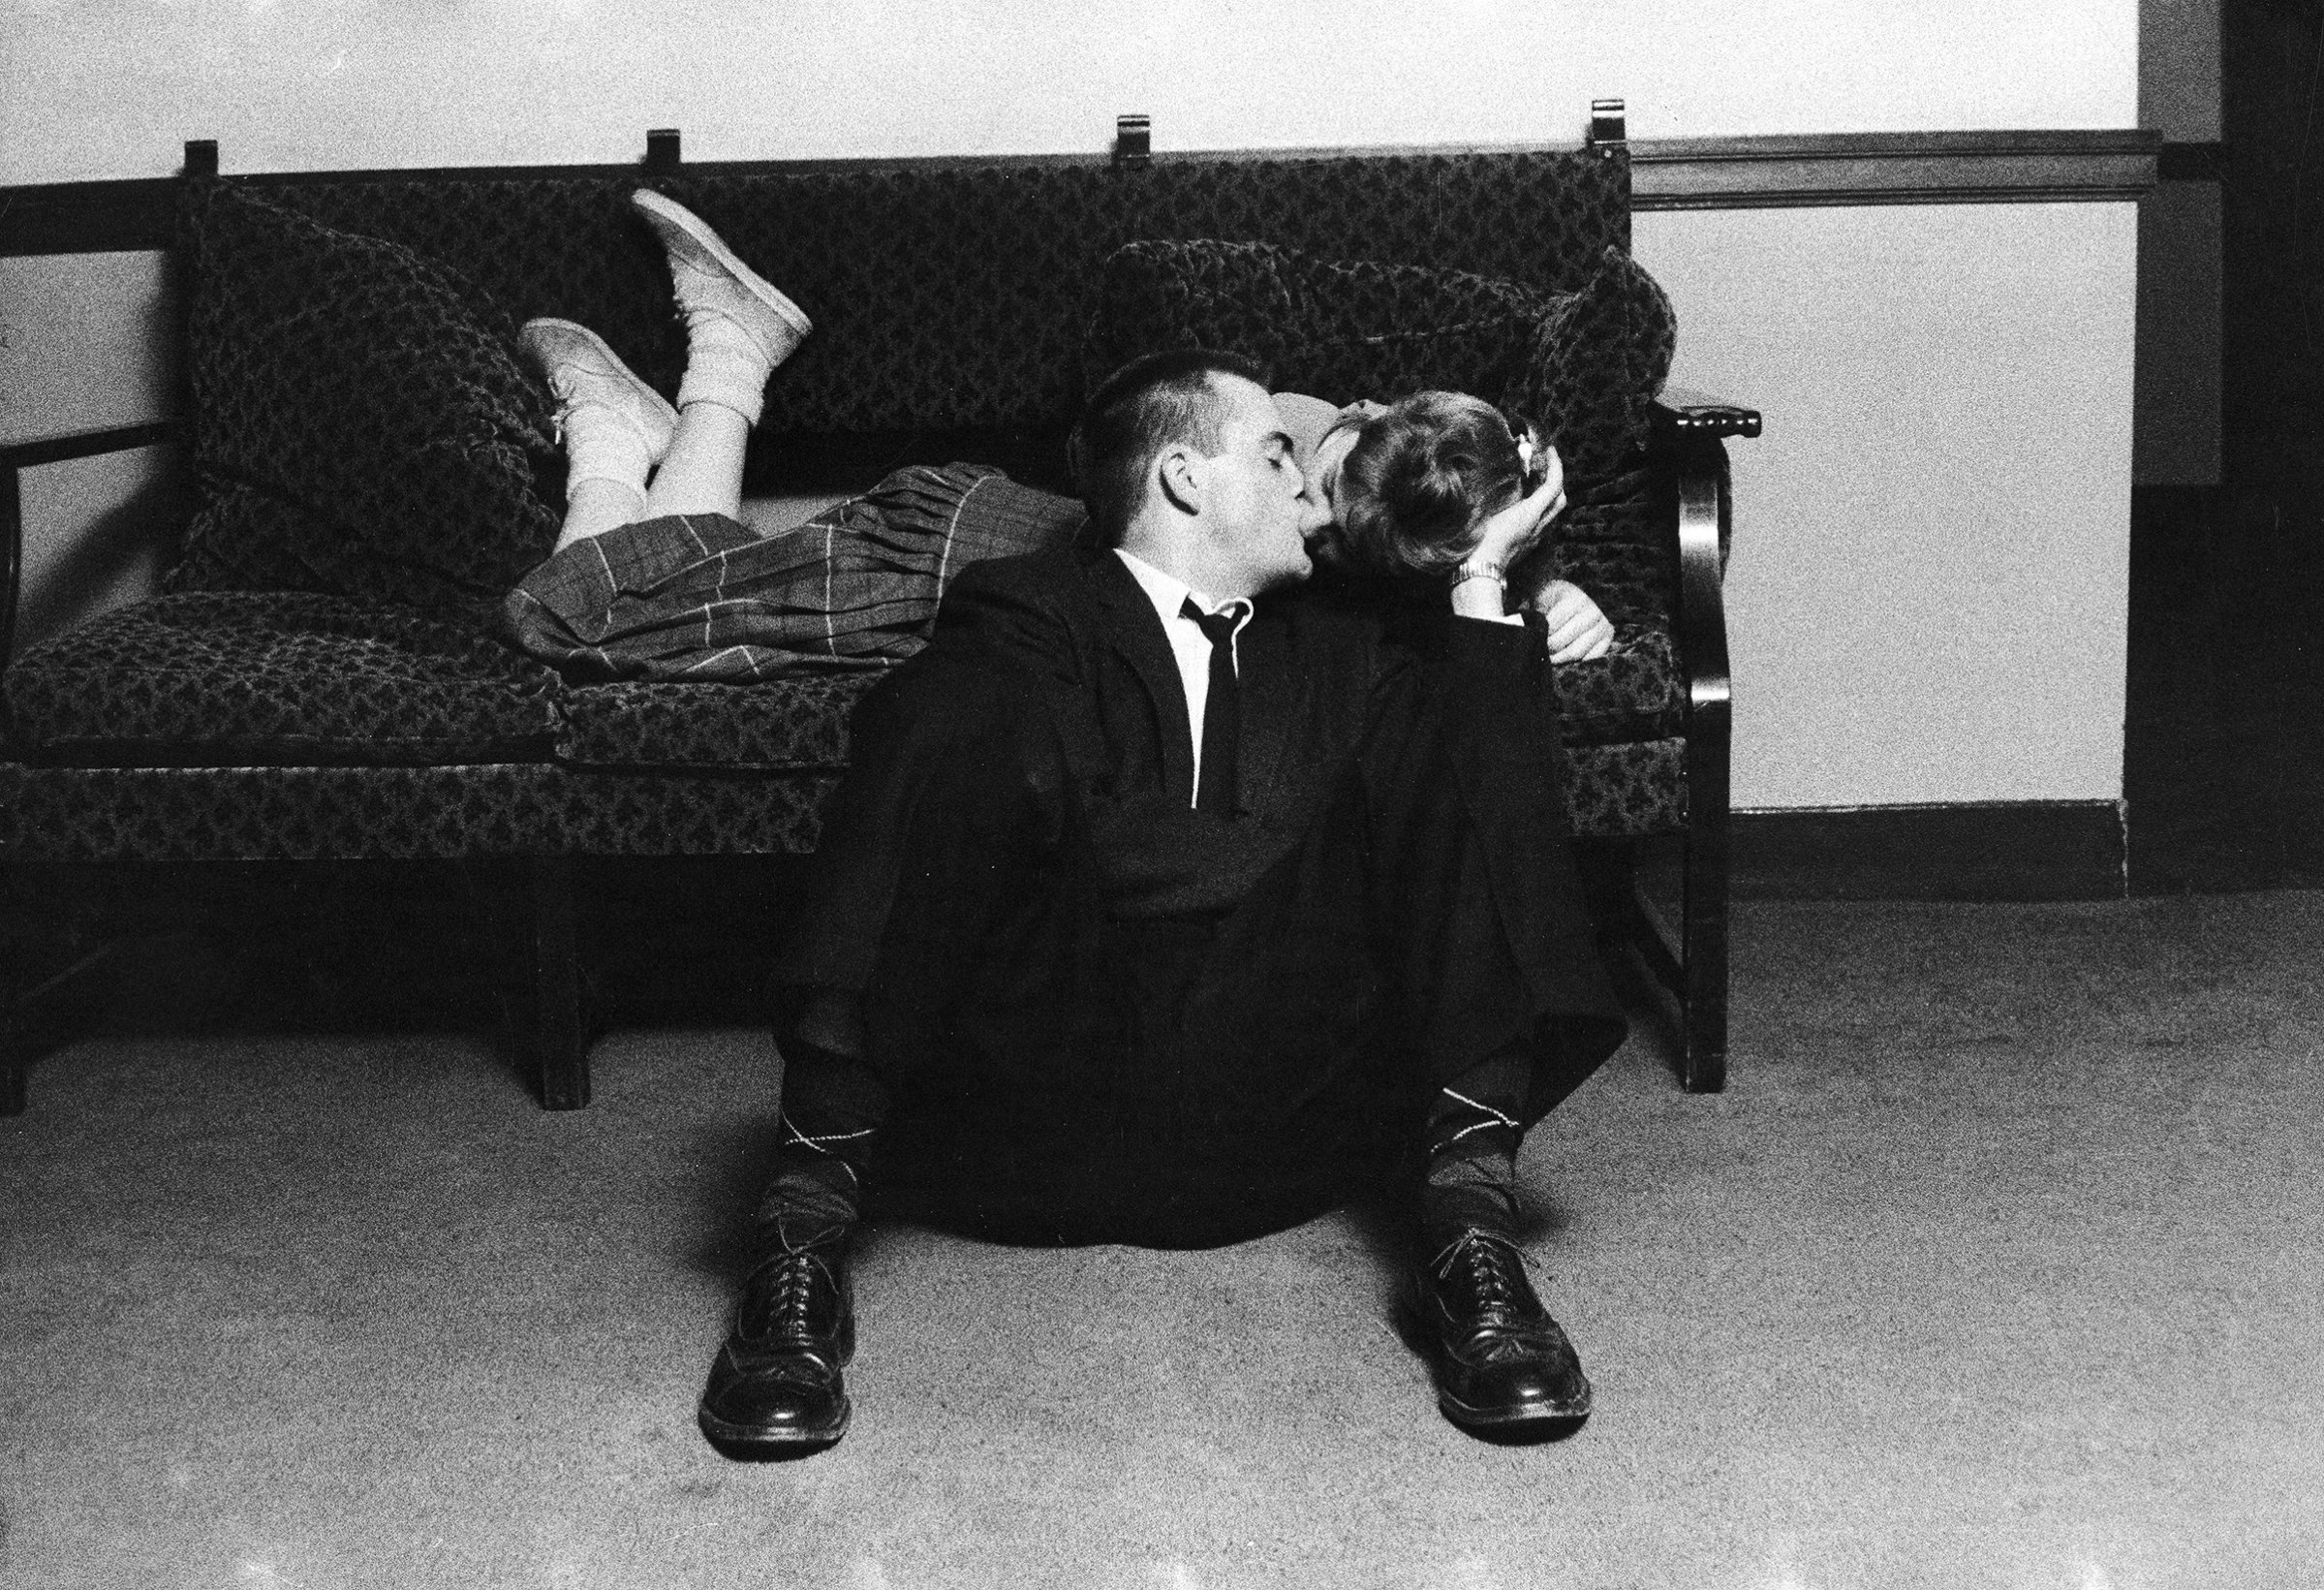 University of Michigan student couple engaged in an impromptu kiss, which was forbidden conduct even before school ban, because earlier rules required couples to have both feet on the floor, in the Union Building on campus. 1957.